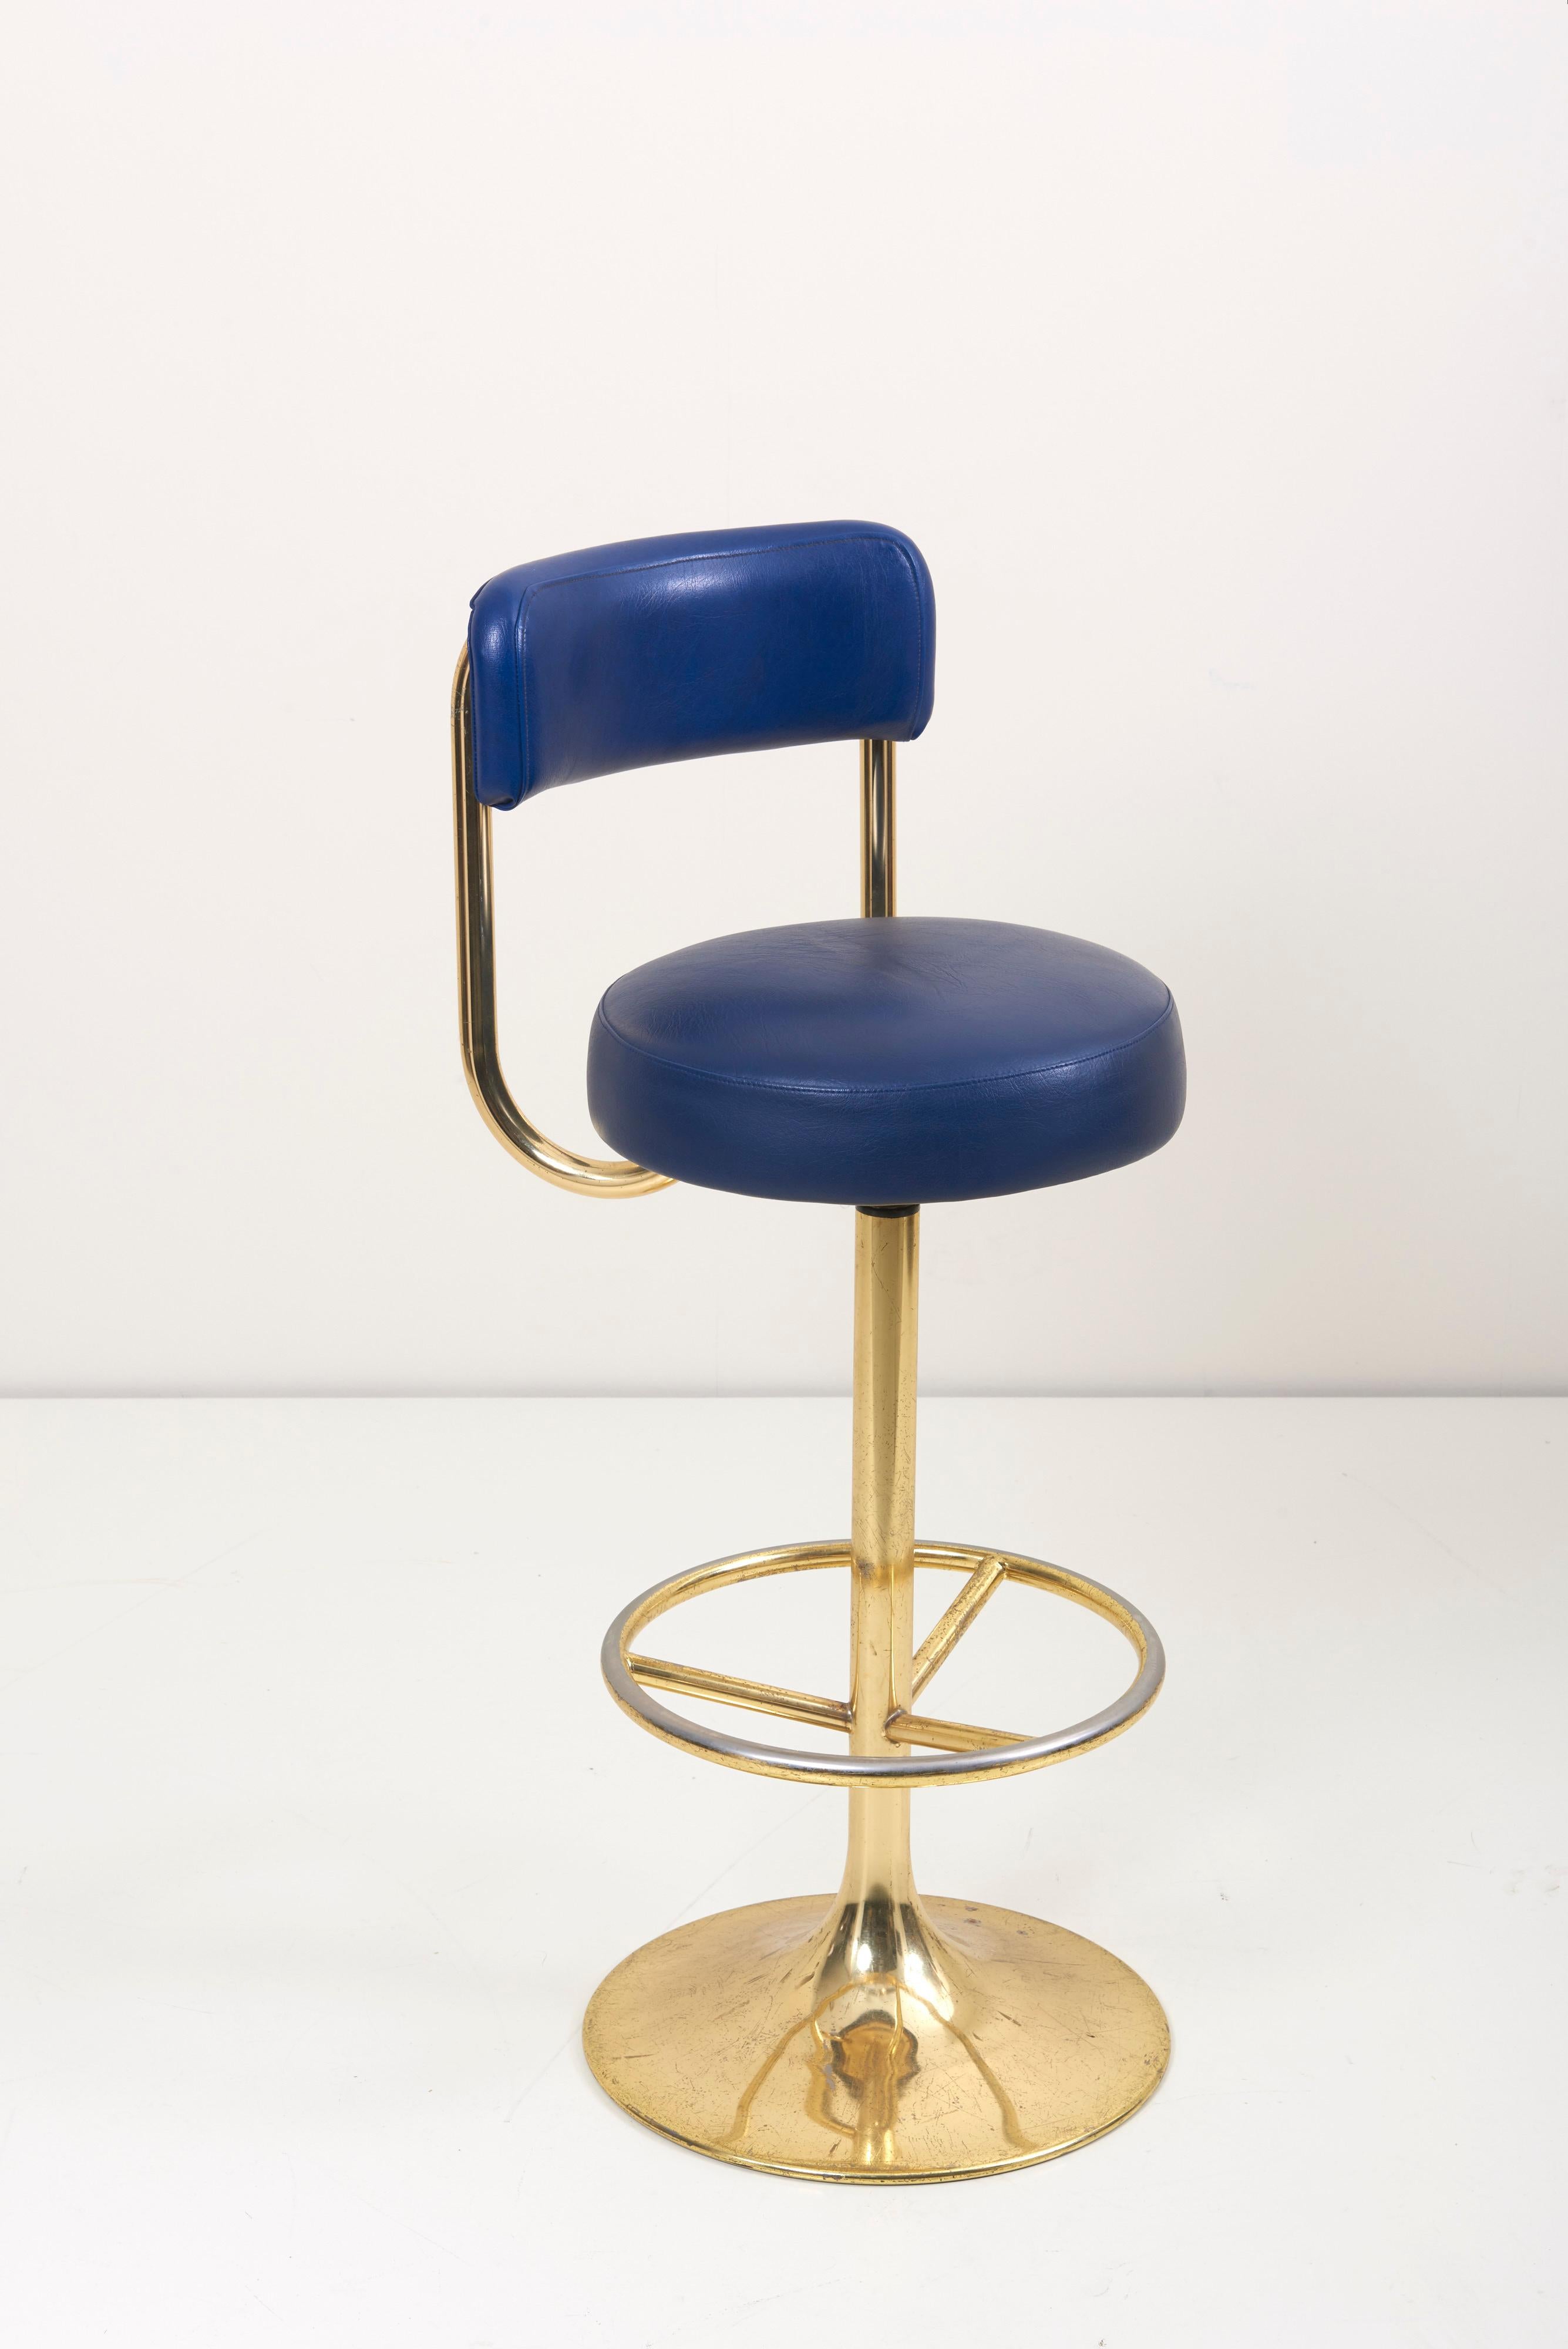 Wonderful gold-plated and original faux leather barstool. The stool is very comfortable.
It is designed by Börje Johansson and produced by Johansson Design in Markaryd, Sweden and labeled.

The last one of a huge quantity we had. The leather has